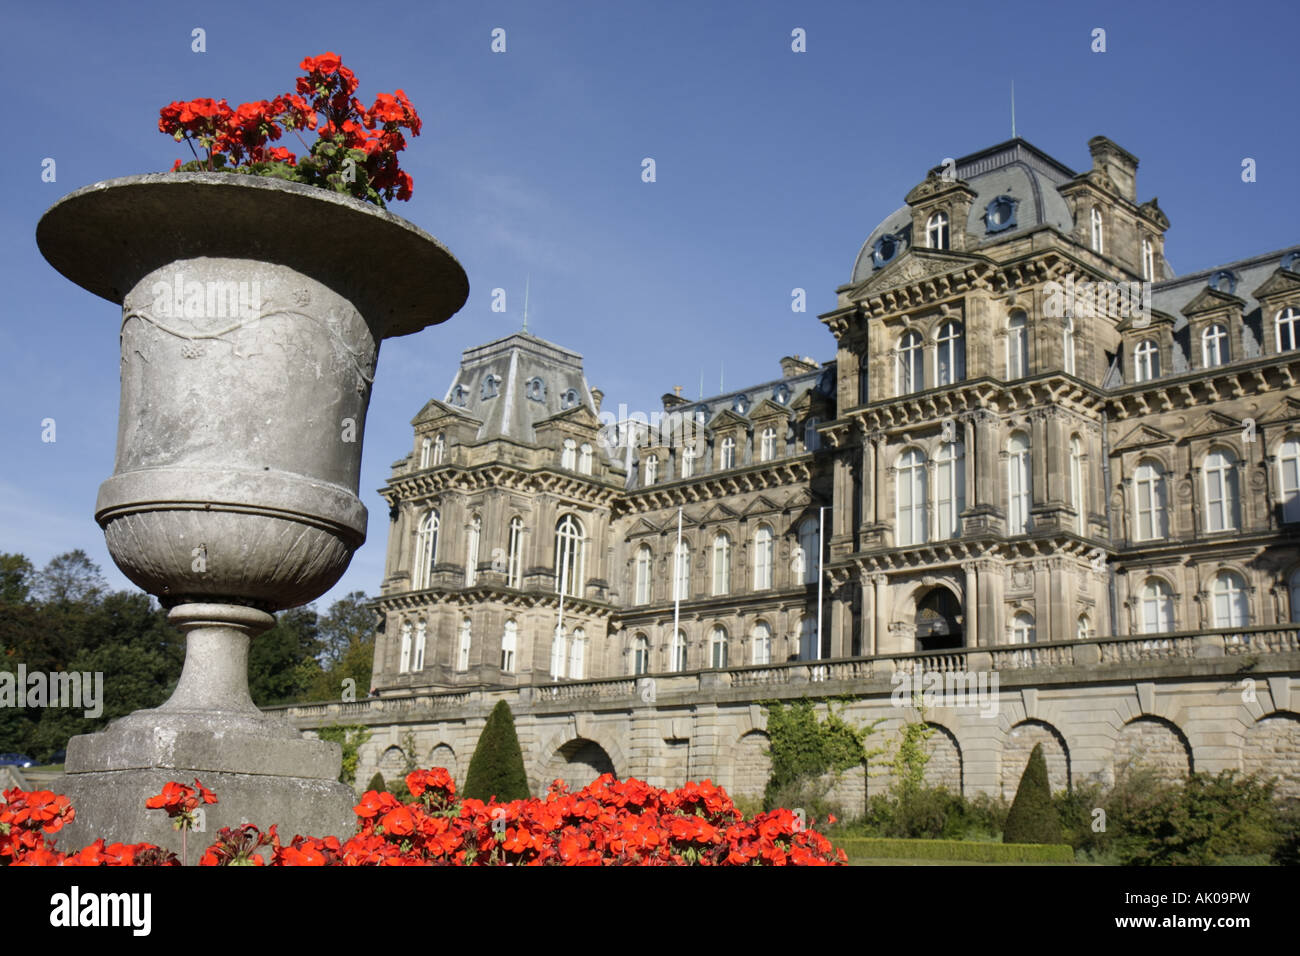 UK England County Durham,Barnard Castle,The Bowes Museum,1869 French style chateau,European art collection,UK071005017 Stock Photo